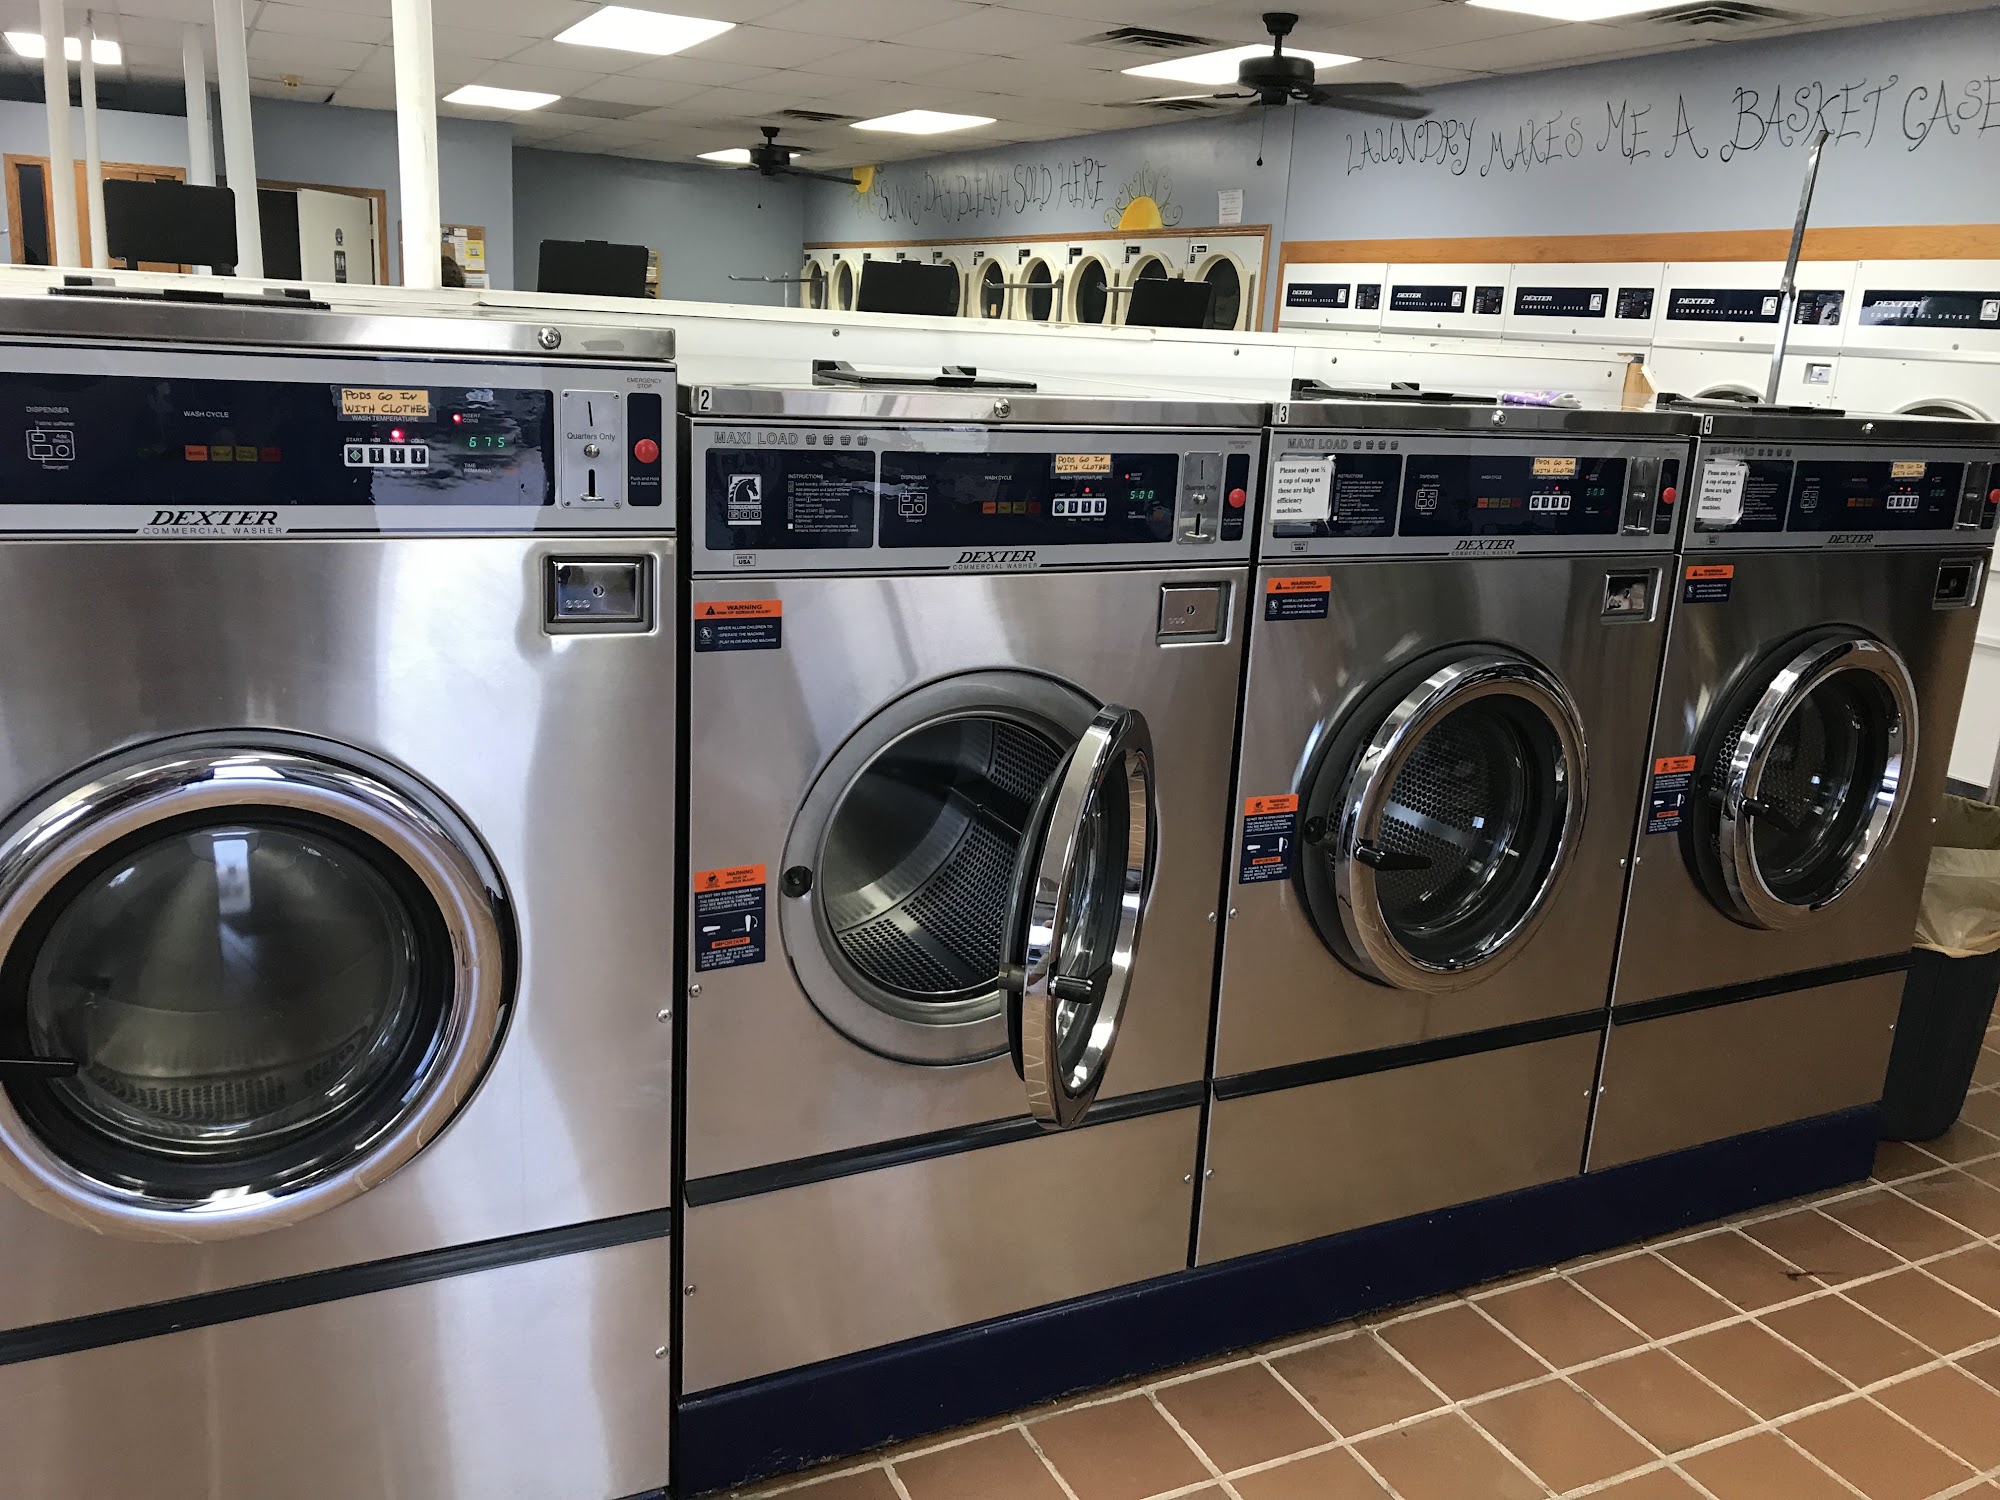 Maytag Laundry & Tanning 805 West St, Grinnell Iowa 50112